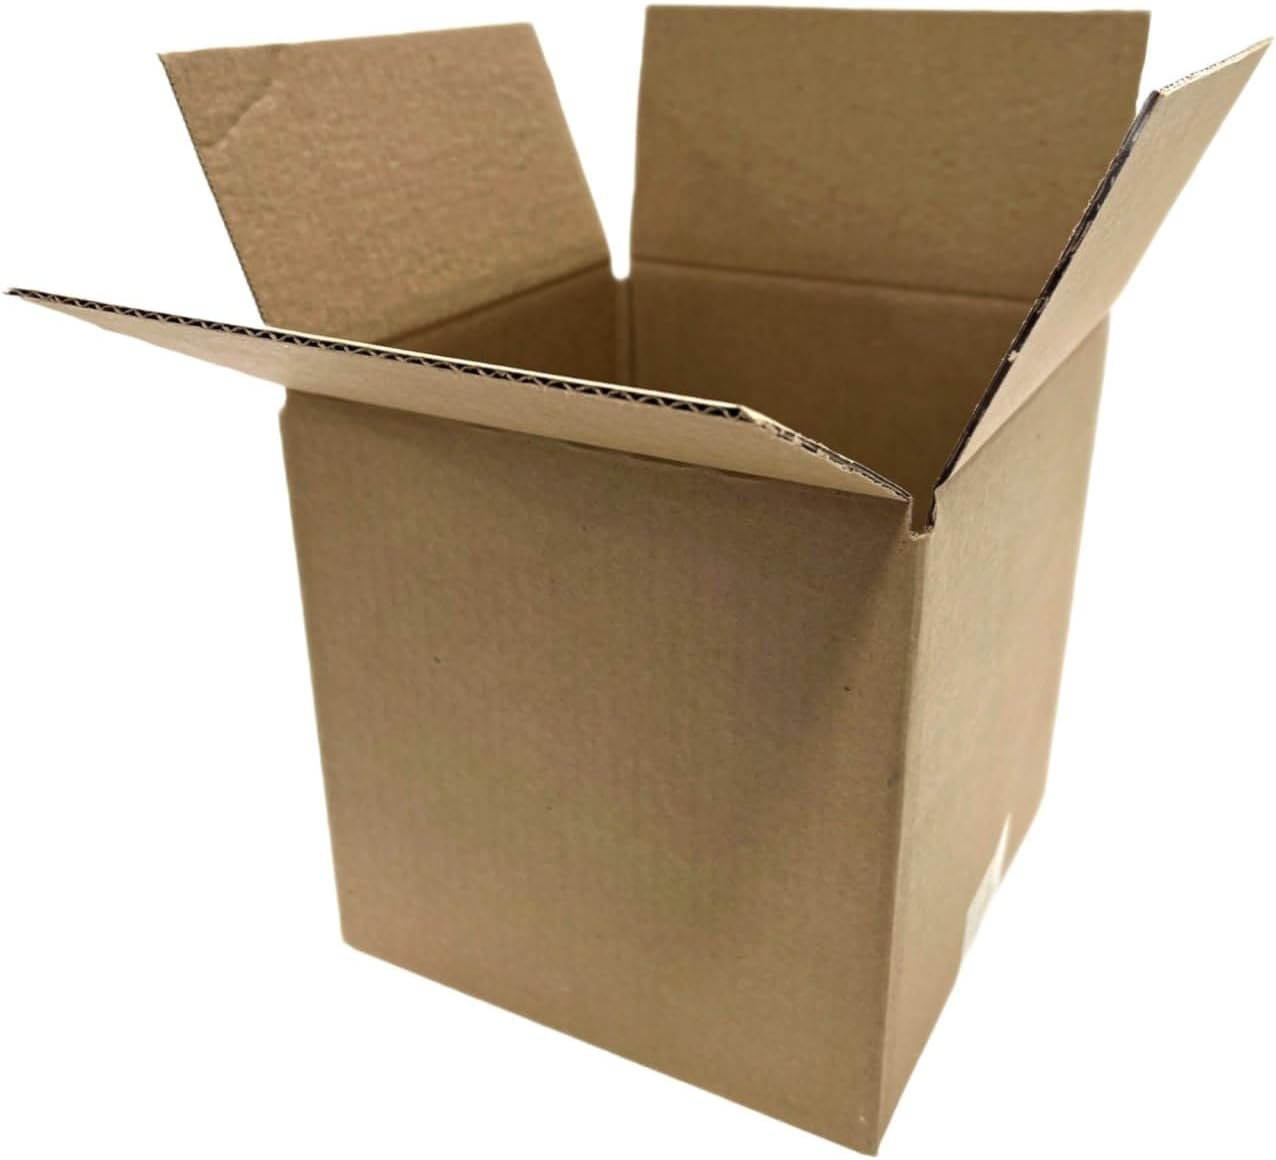 100 10x10x10 Cardboard Paper Boxes Mailing Packing Shipping Box Corrugated